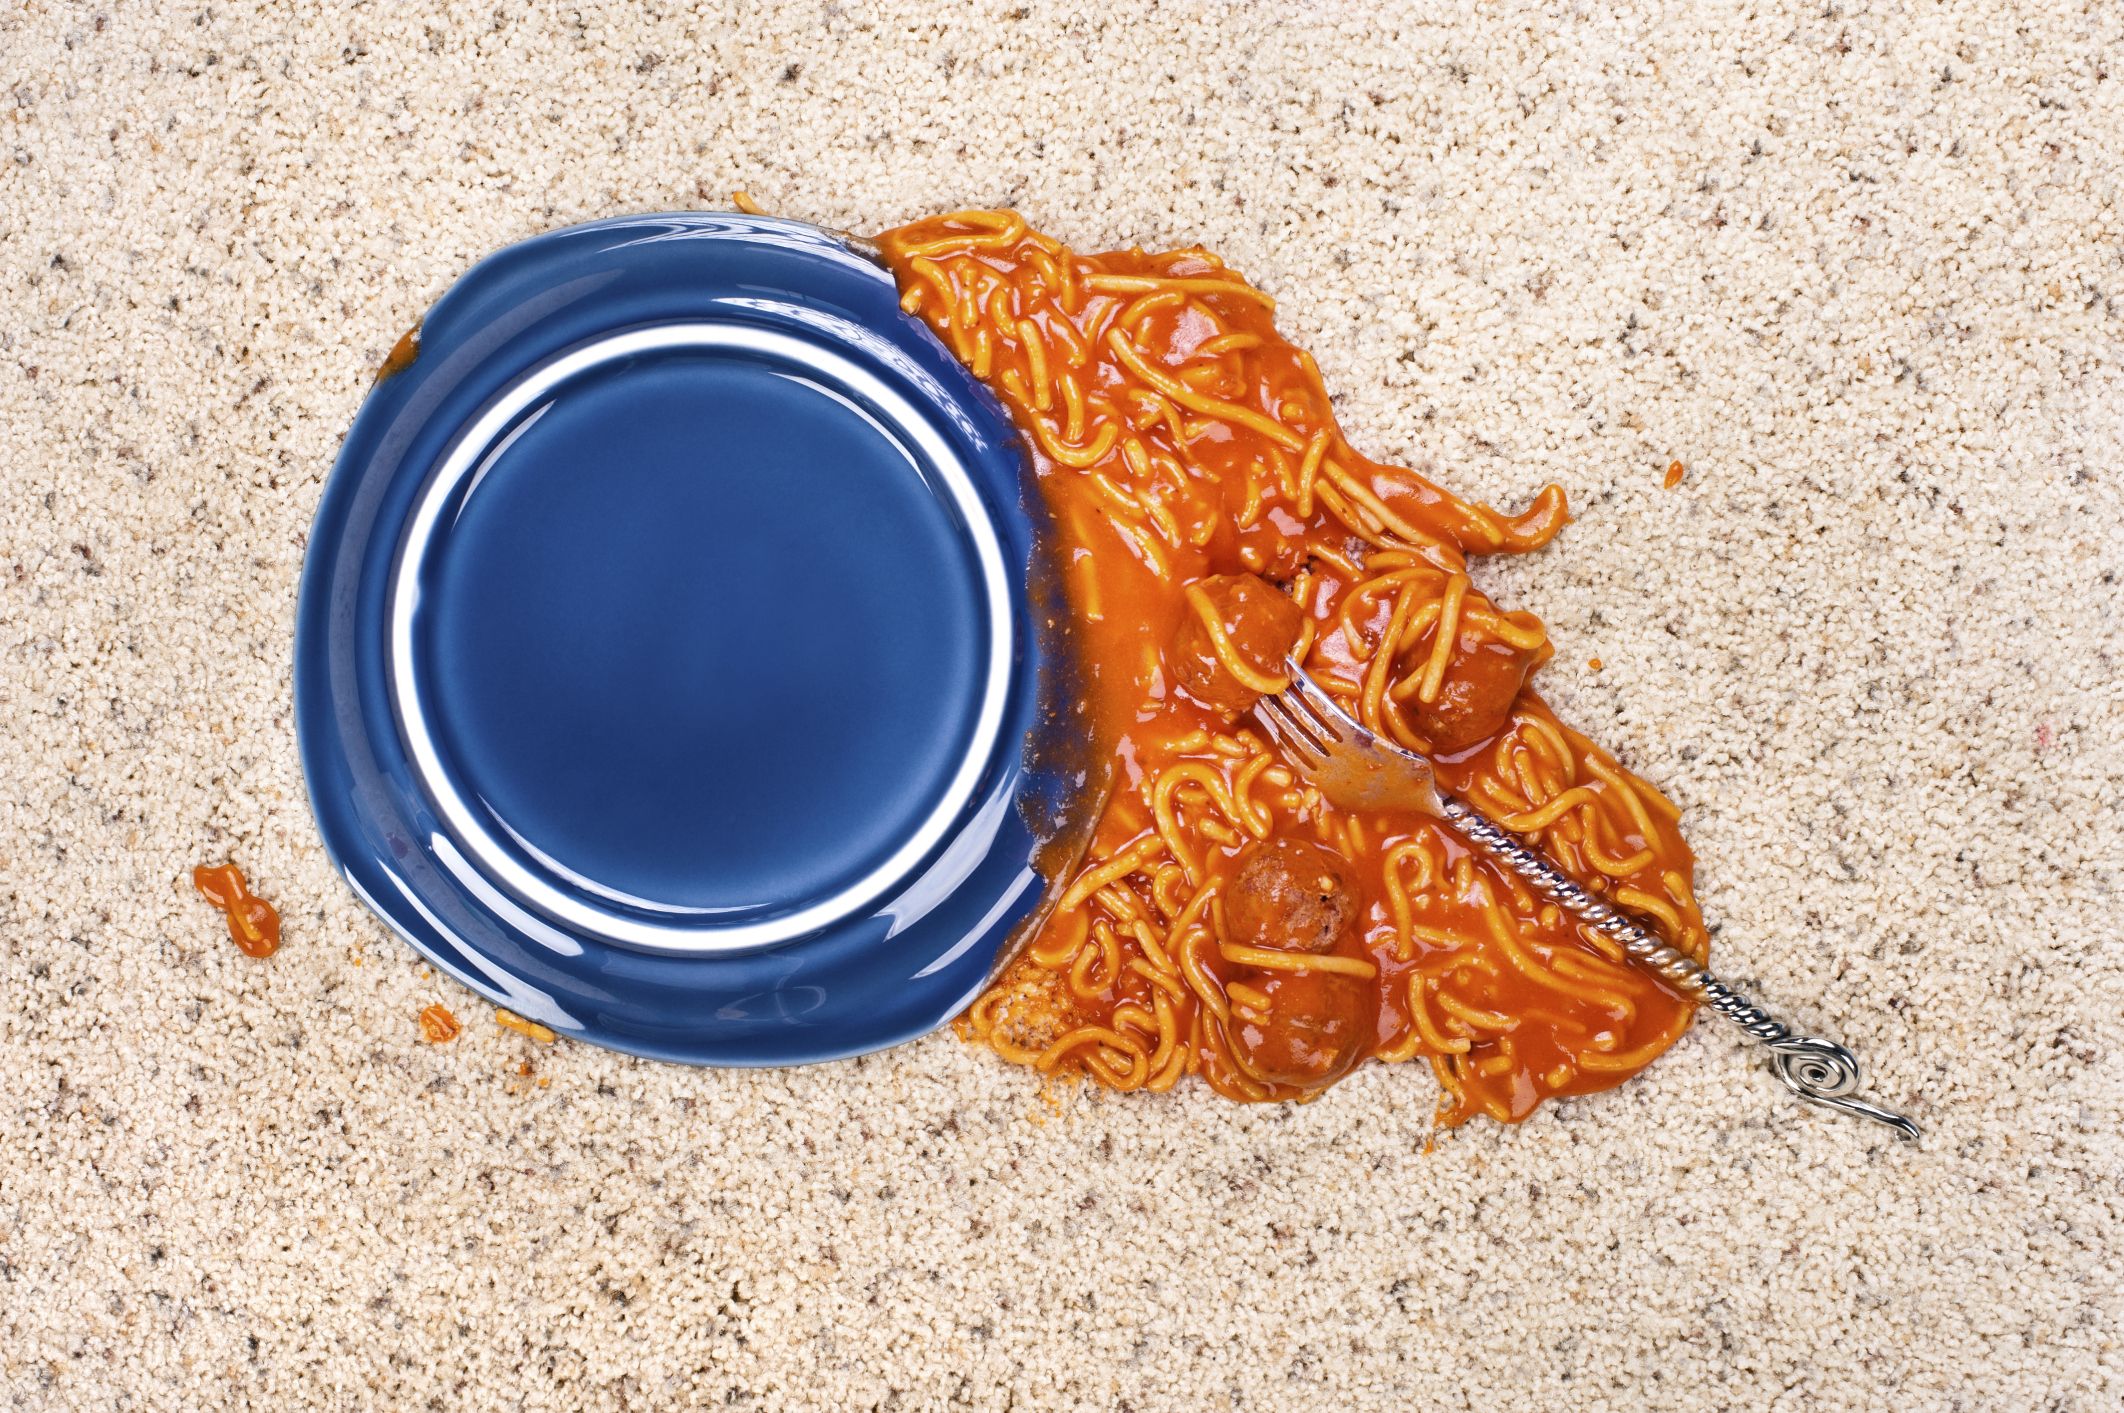 Dropped plate of spaghetti on carpet